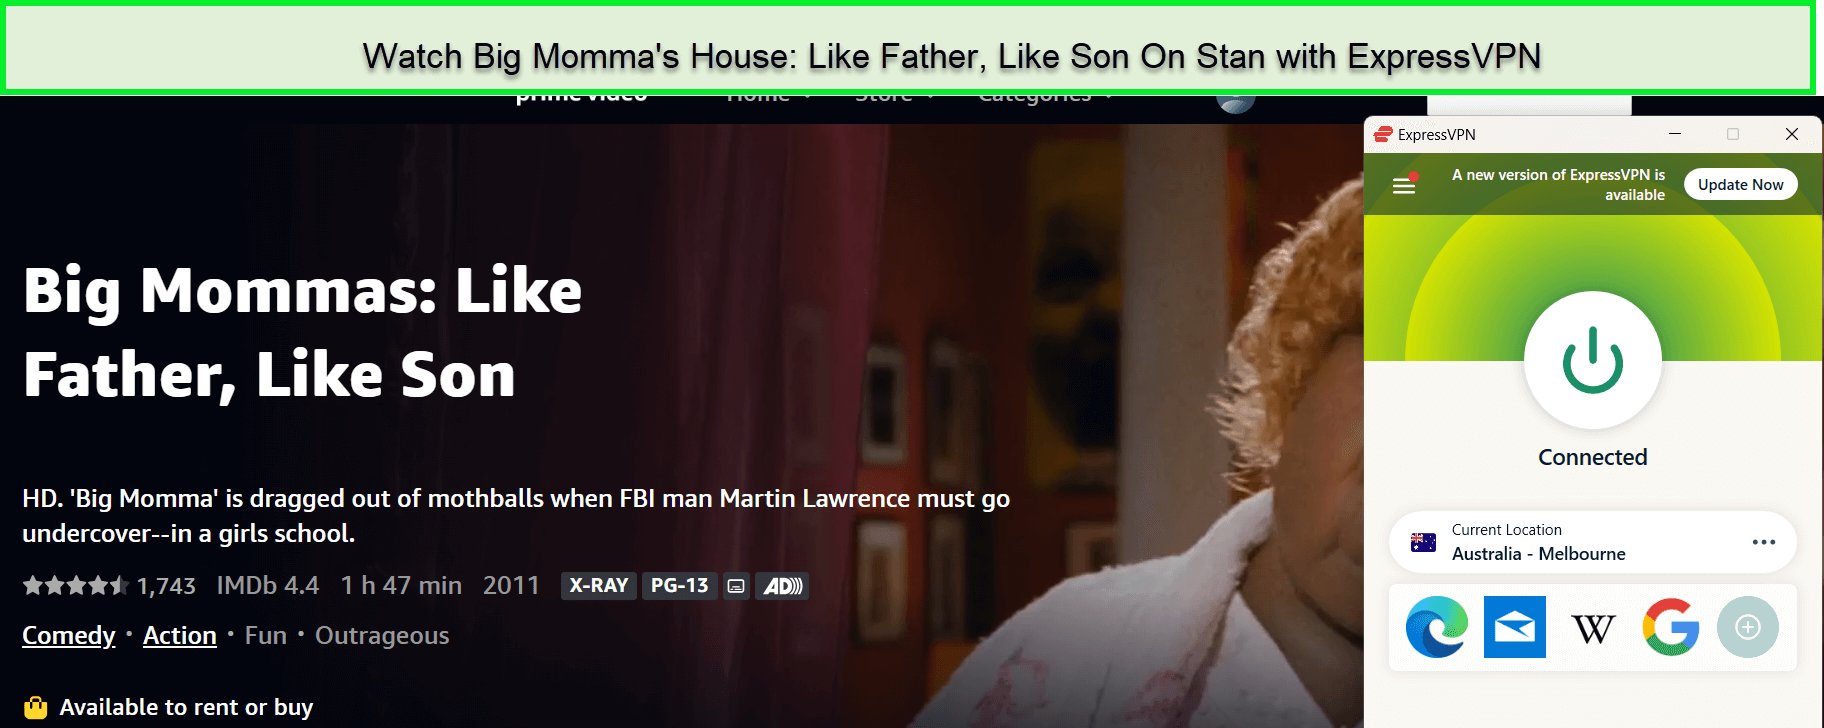 Watch Big Momma's House: Like Father, Like Son in-Hong Kong On Stan